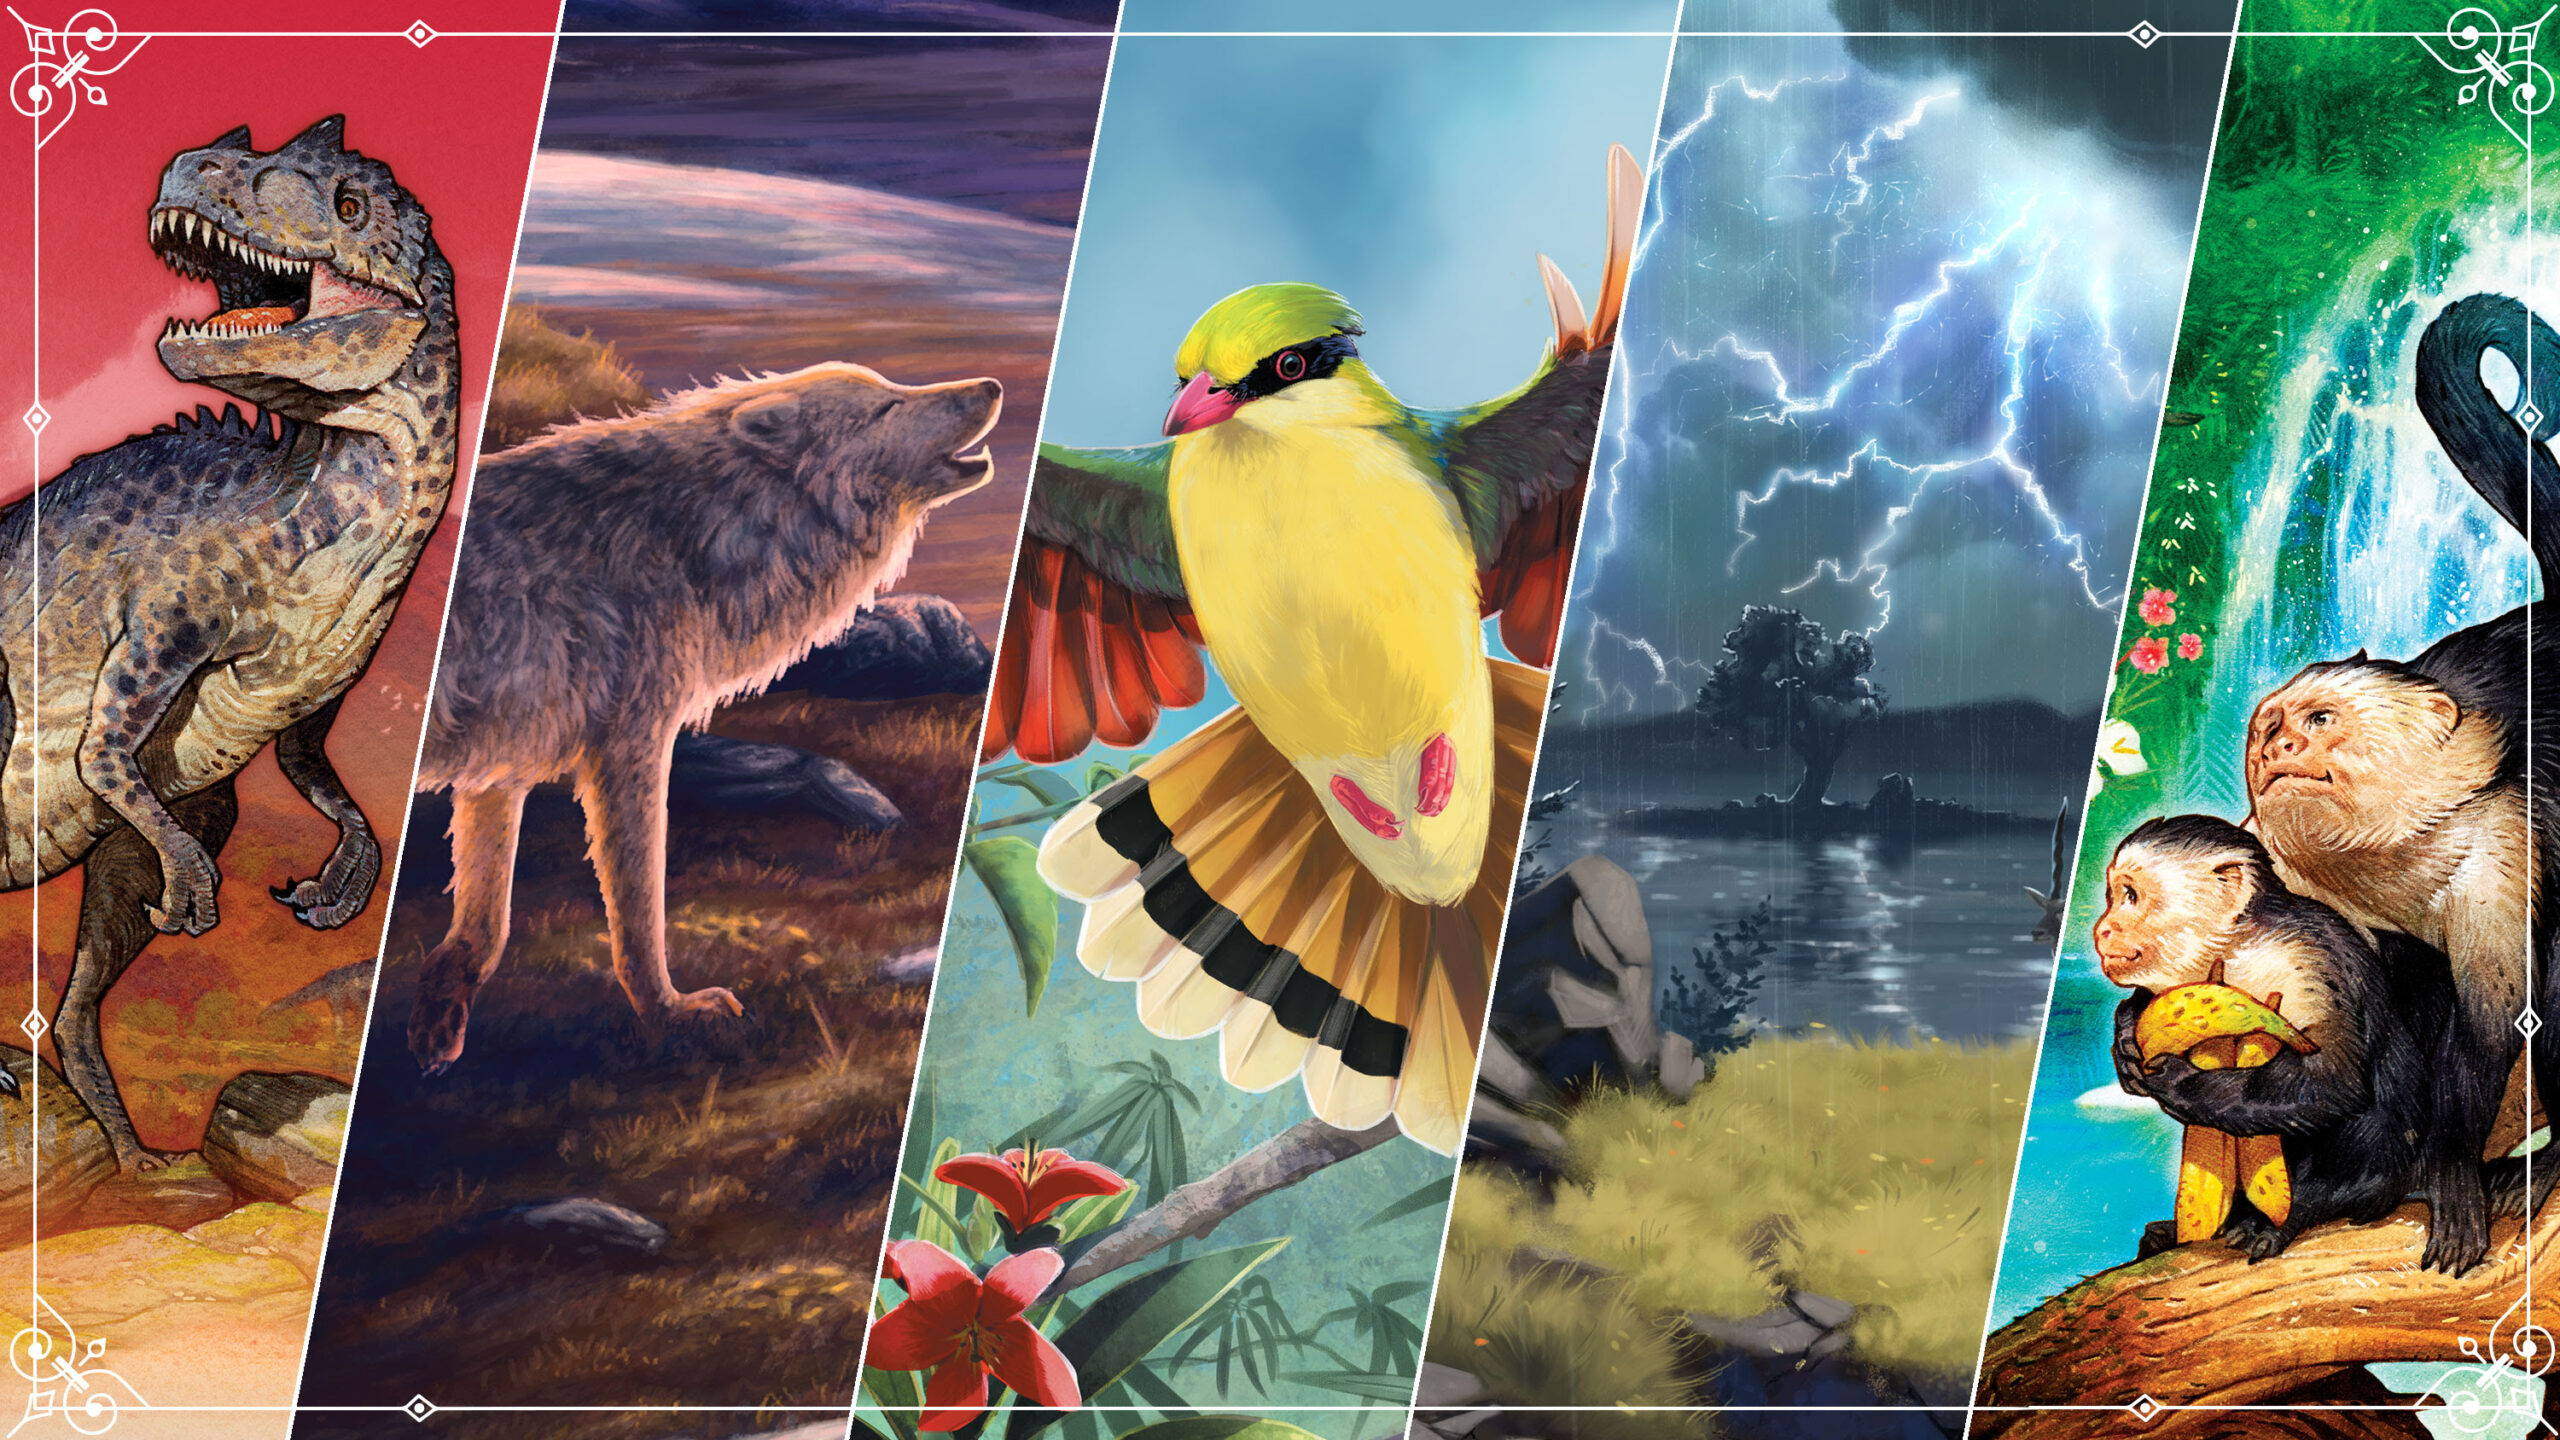 Nature is a modular, expandable remake of board game Evolution